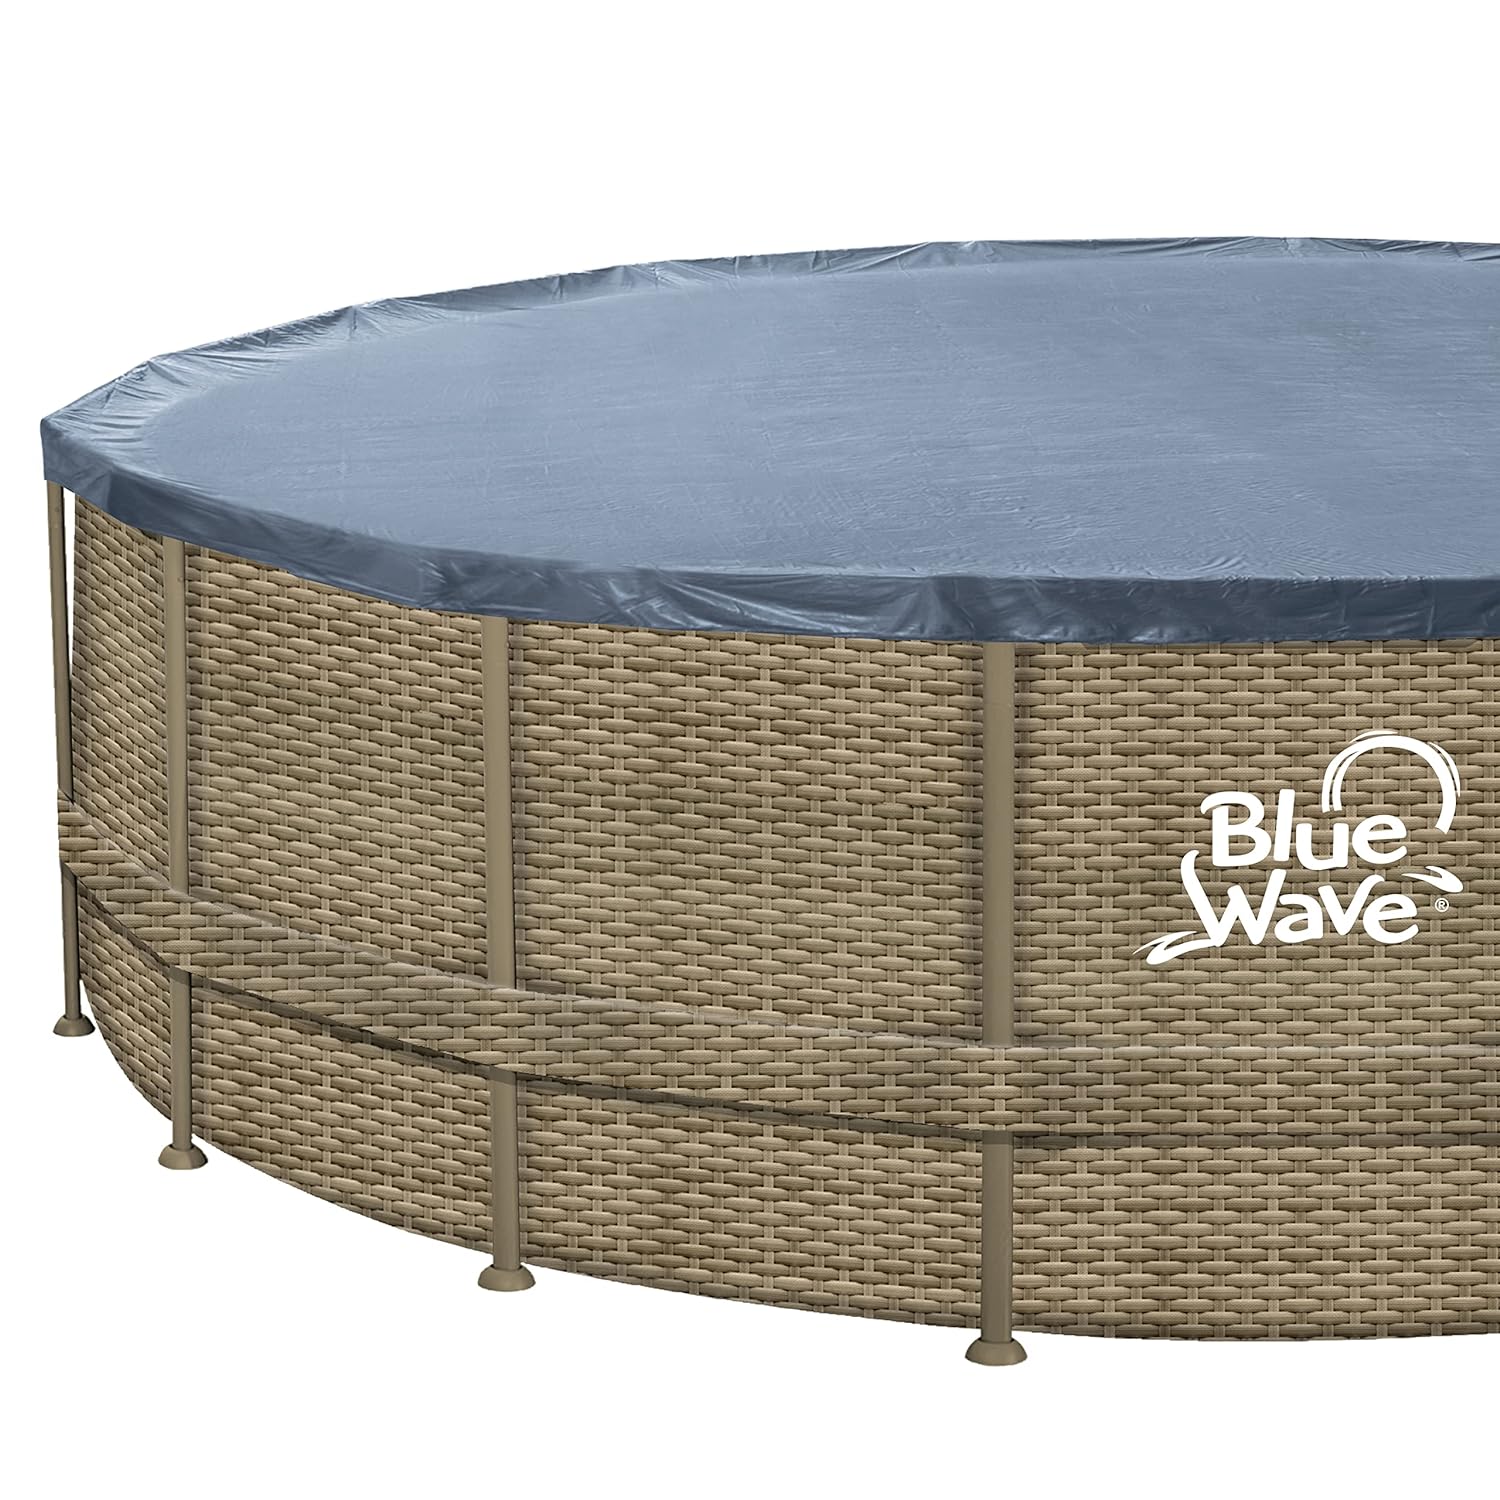 Blue Wave NB19798 24-ft Round x 52-in deep Dark Cocoa Wicker Frame Package Above Ground Swimming Pool with Cover, x, Brown…